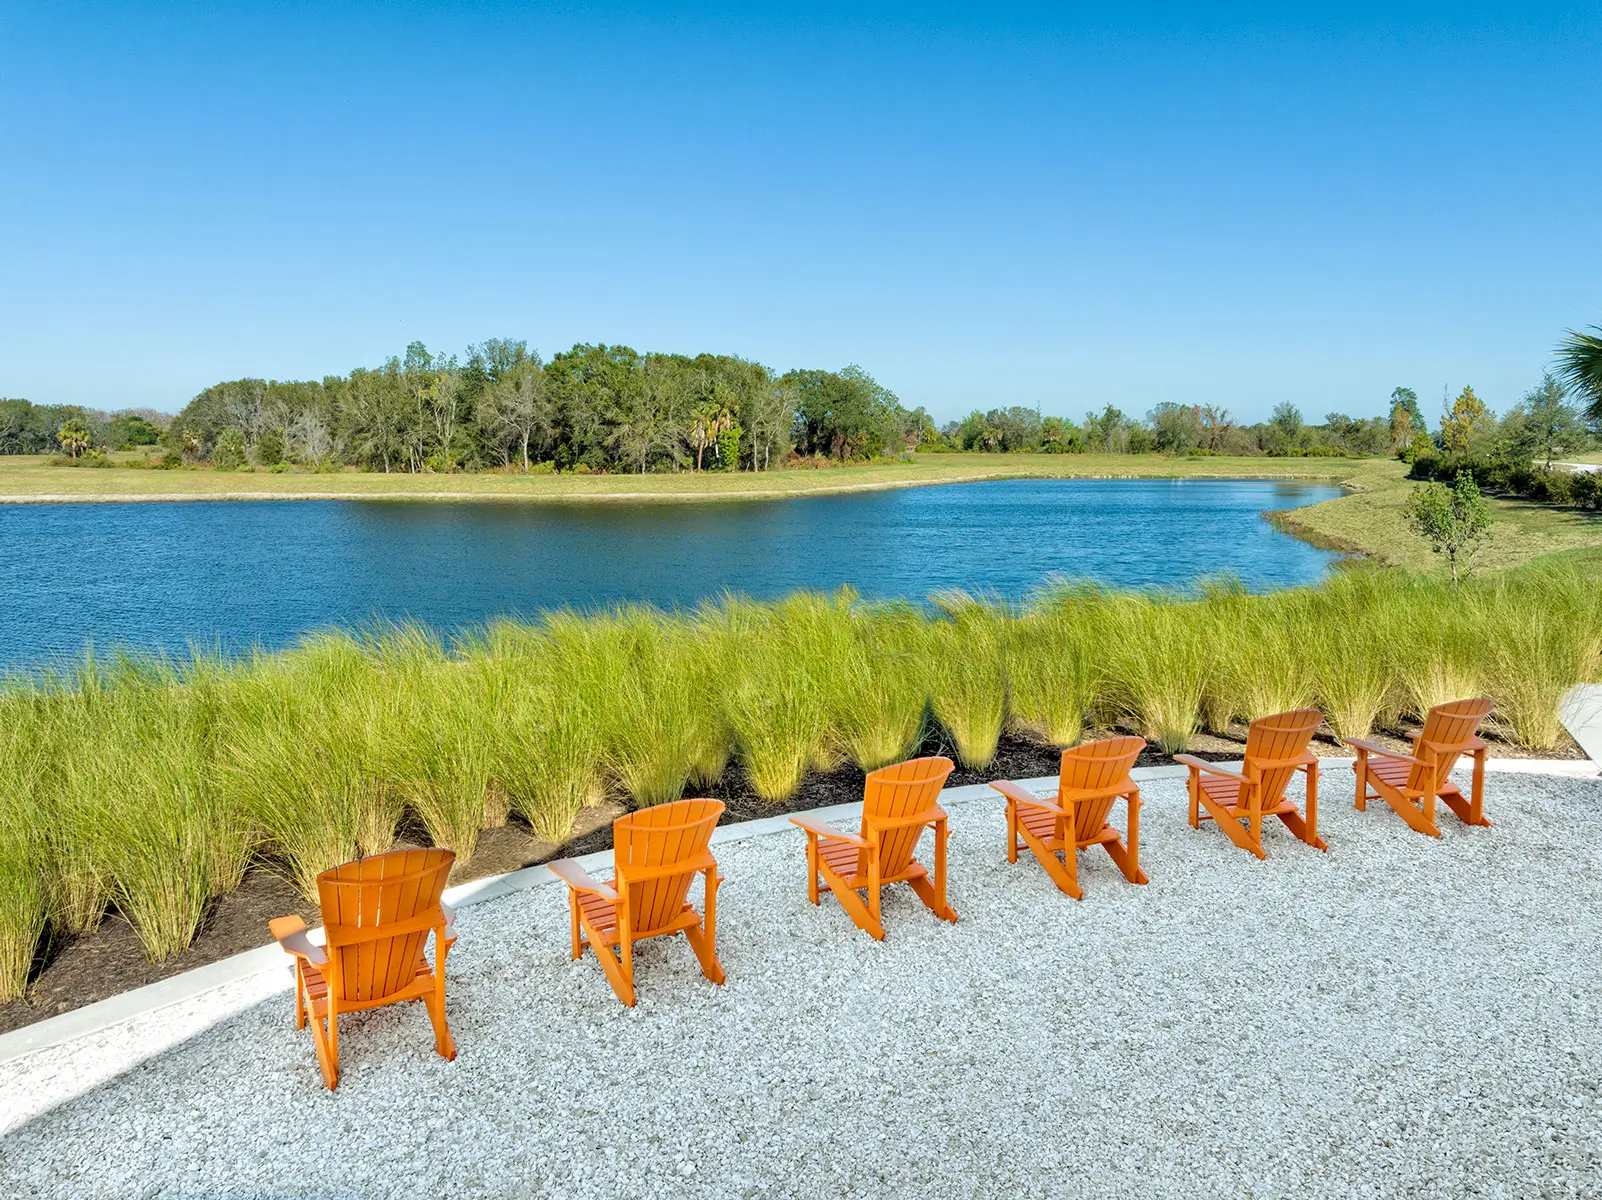 Orange outdoor chairs lining the grassy edge of a river at North River Ranch, Parrish, FL